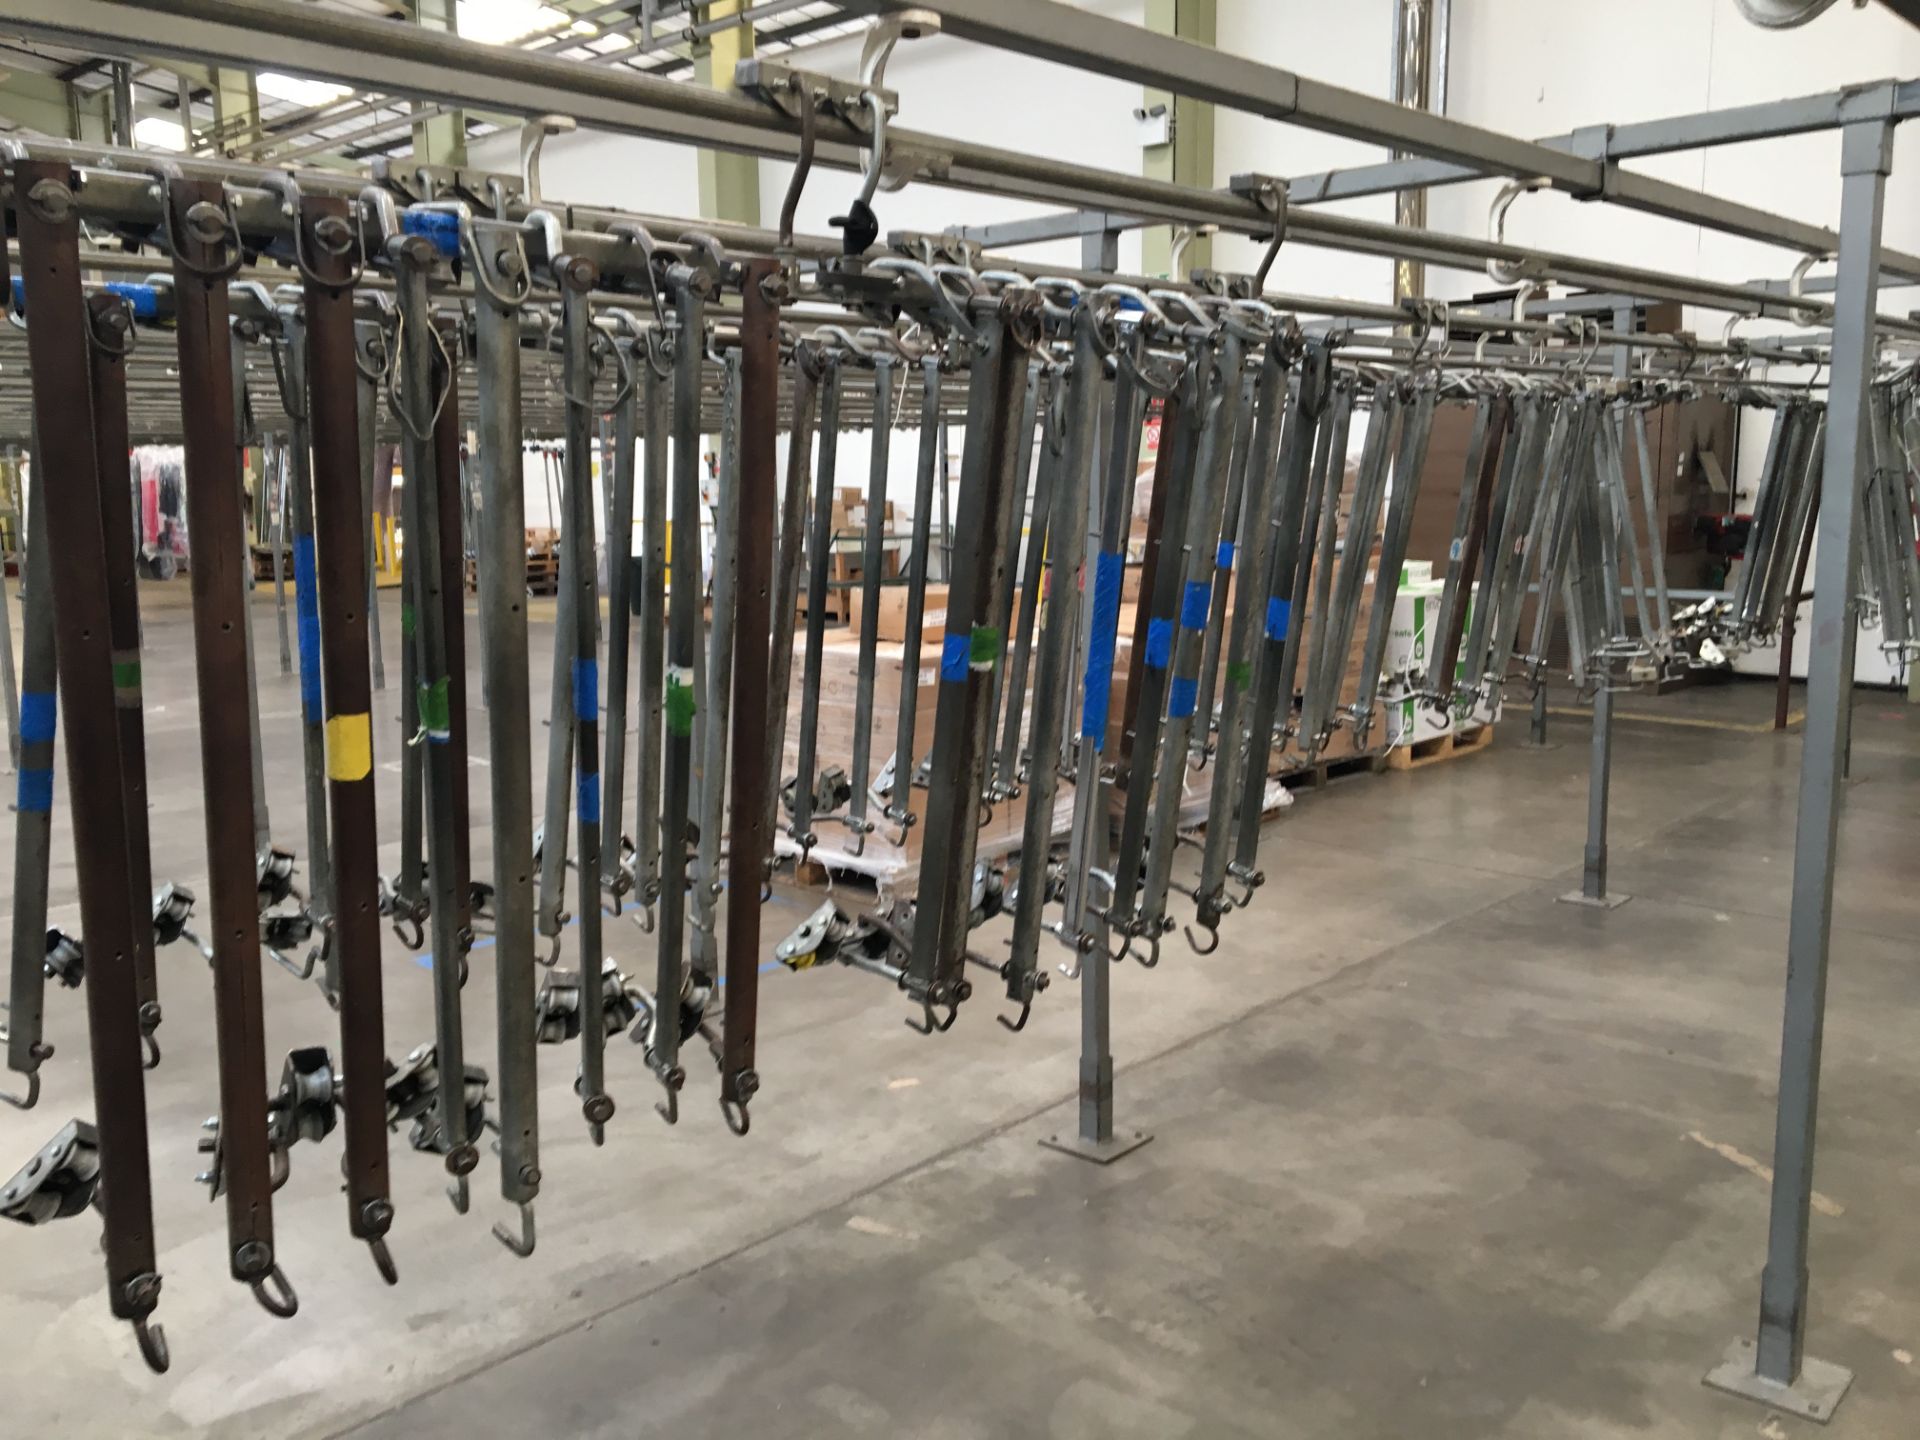 Overhead Garment Handling Conveyor System (thoughout premises) - Image 18 of 21